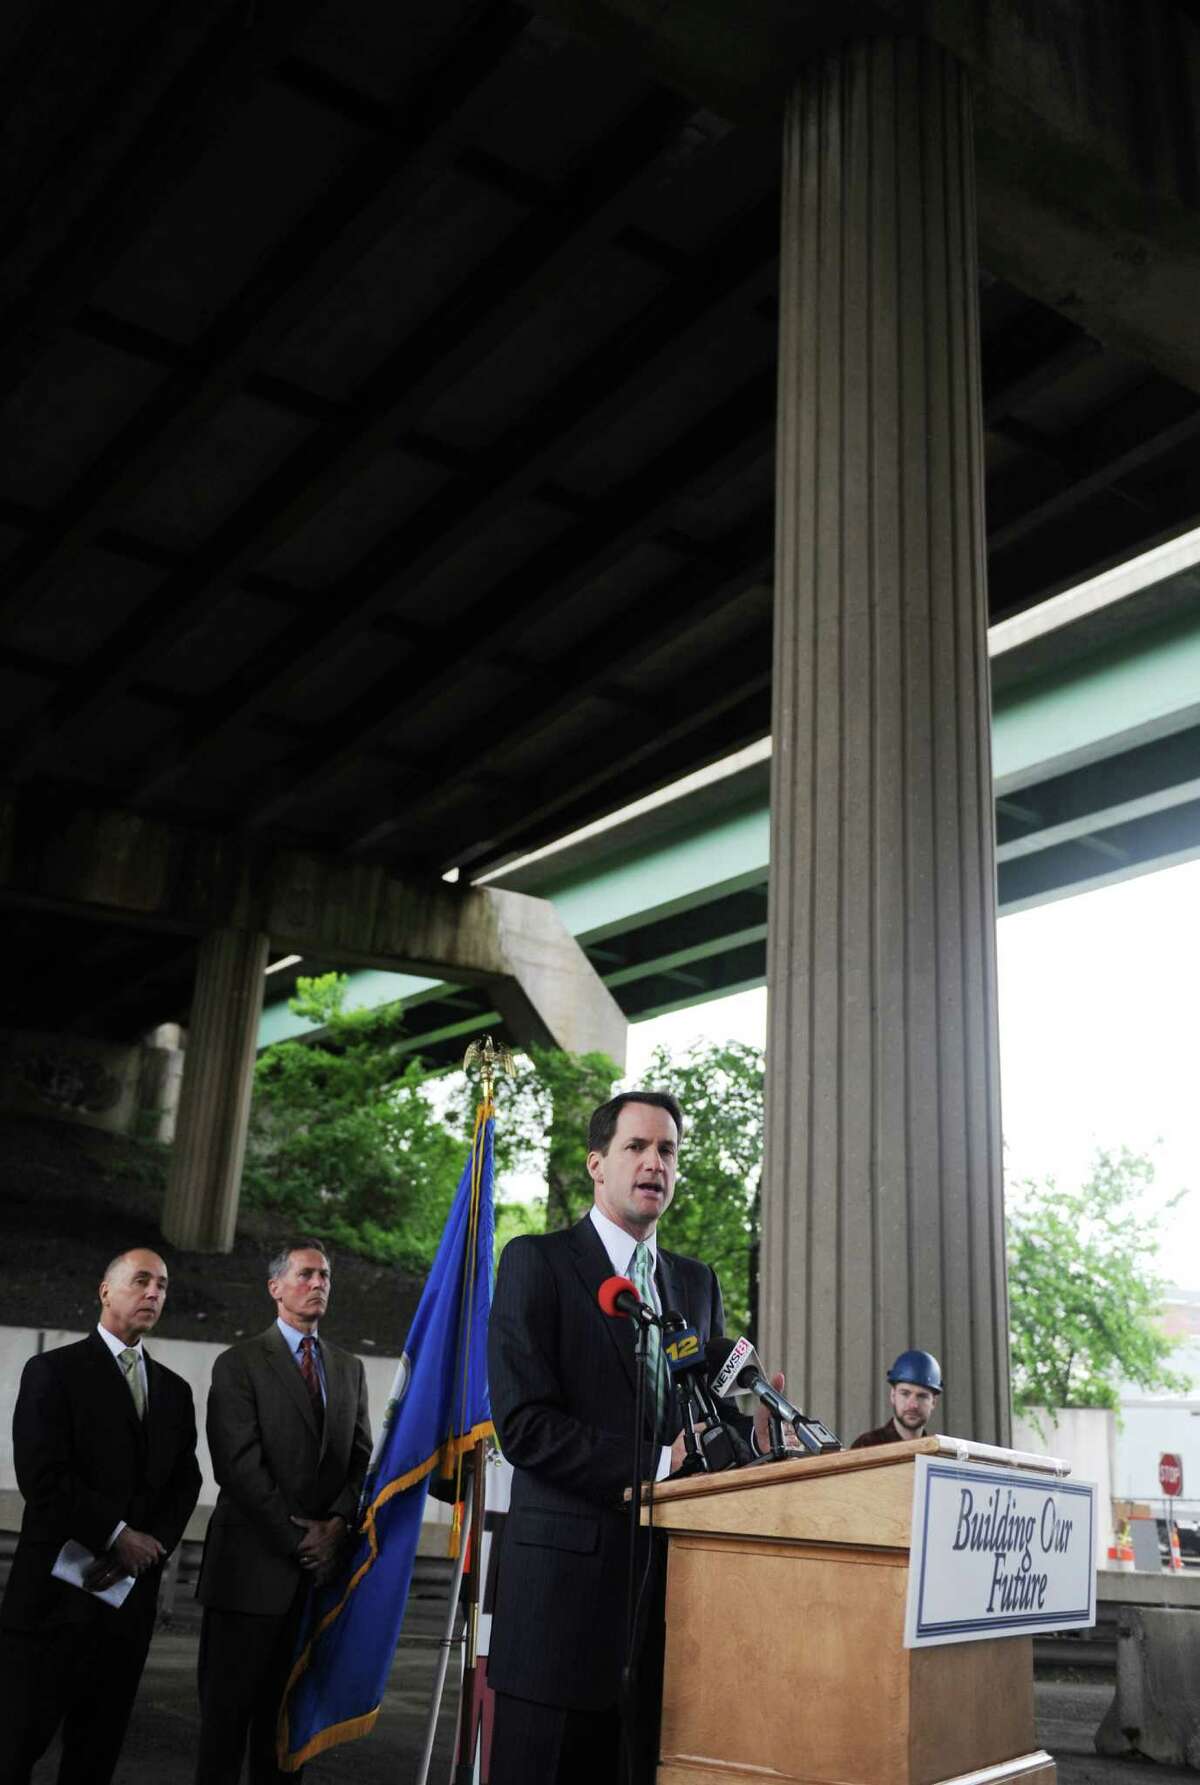 U.S. Rep. Jim Himes speaks at a bridge safety press conference beneath the I-95 bridge passing over the intersection of Lafayette Street and State Street in Stamford, Conn. Monday, June 1, 2015. U.S. Rep. Jim Himes, Stamford Mayor David R. Martin and Connecticut Construction Industries Association President Donald Shubert spoke on the need to repair structurally deficient bridges to maintain the current level of transportation and create jobs. A recent report found that there were 63 structurally deficient bridges in Fairfield County and this one in Stamford is particularly important as it passes over the Metro-North track and a collapse or falling debris could potentially cripple transportation throughout the region.